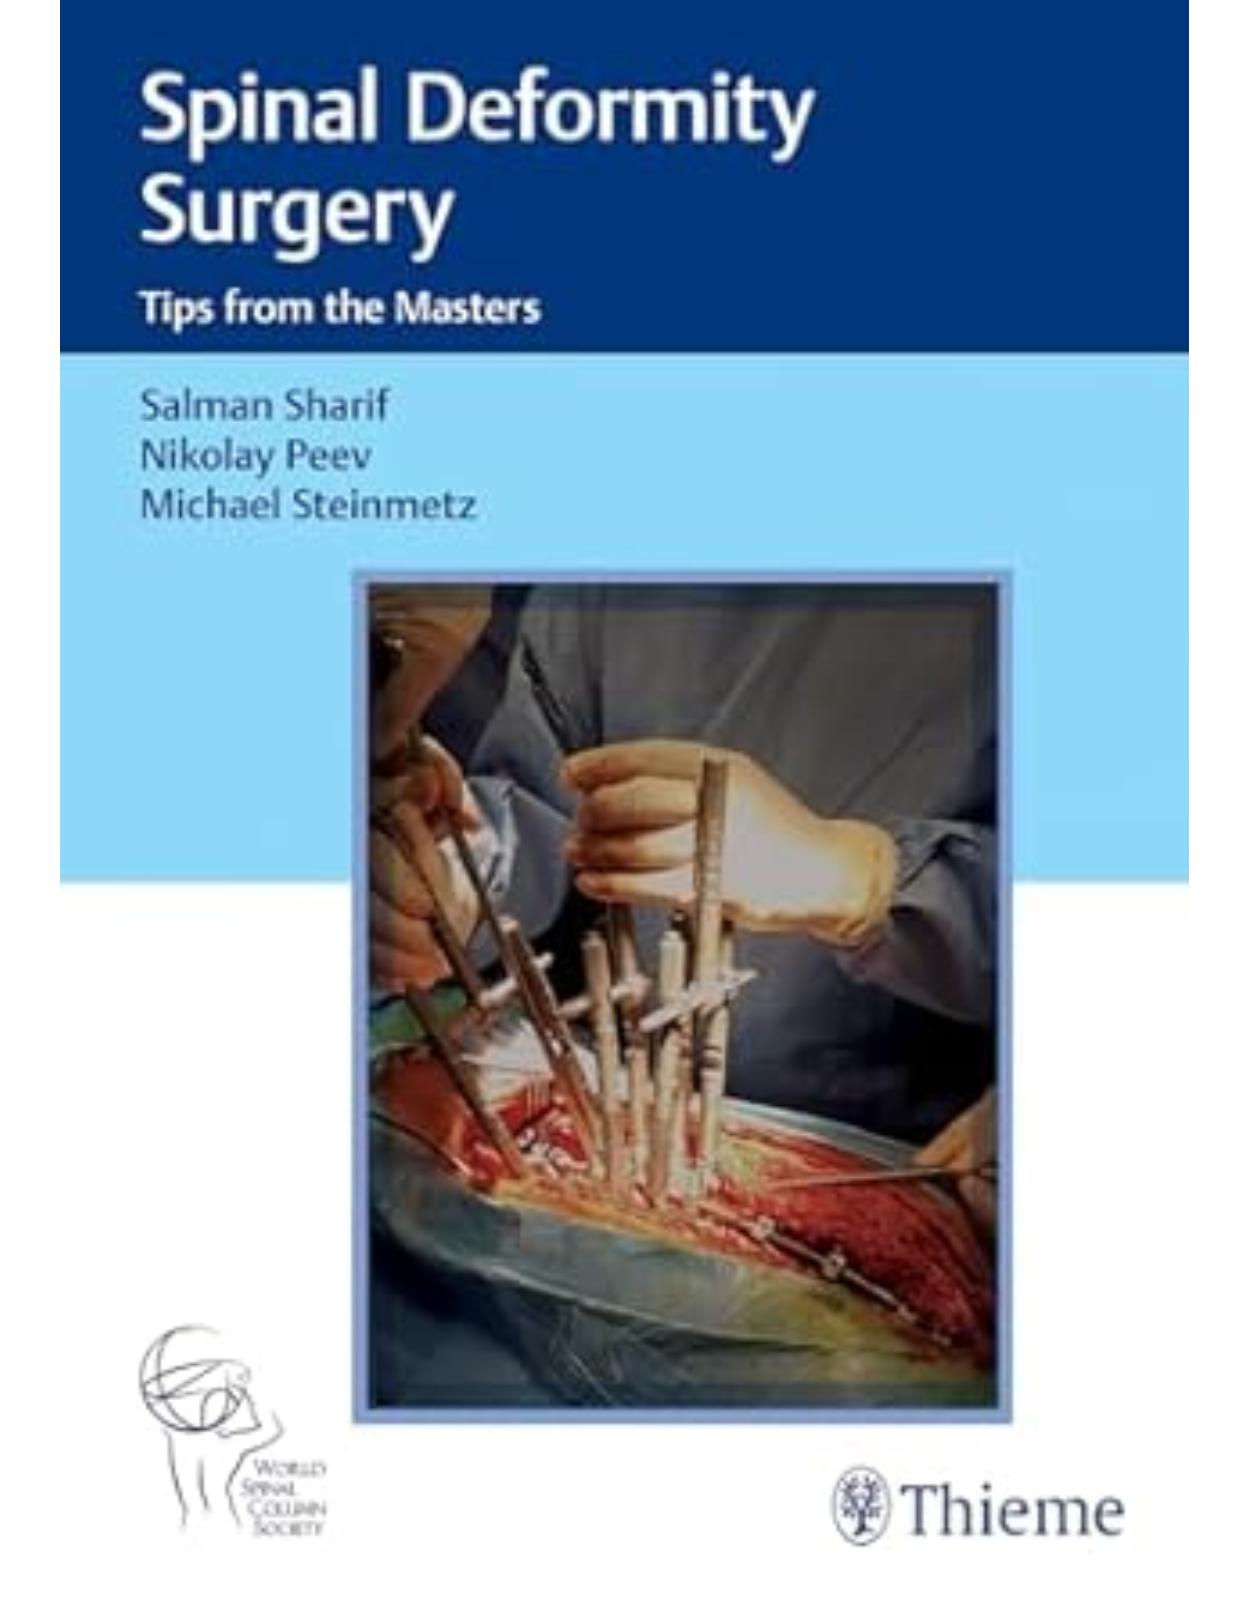 Spinal Deformity Surgery – Tips from the Masters